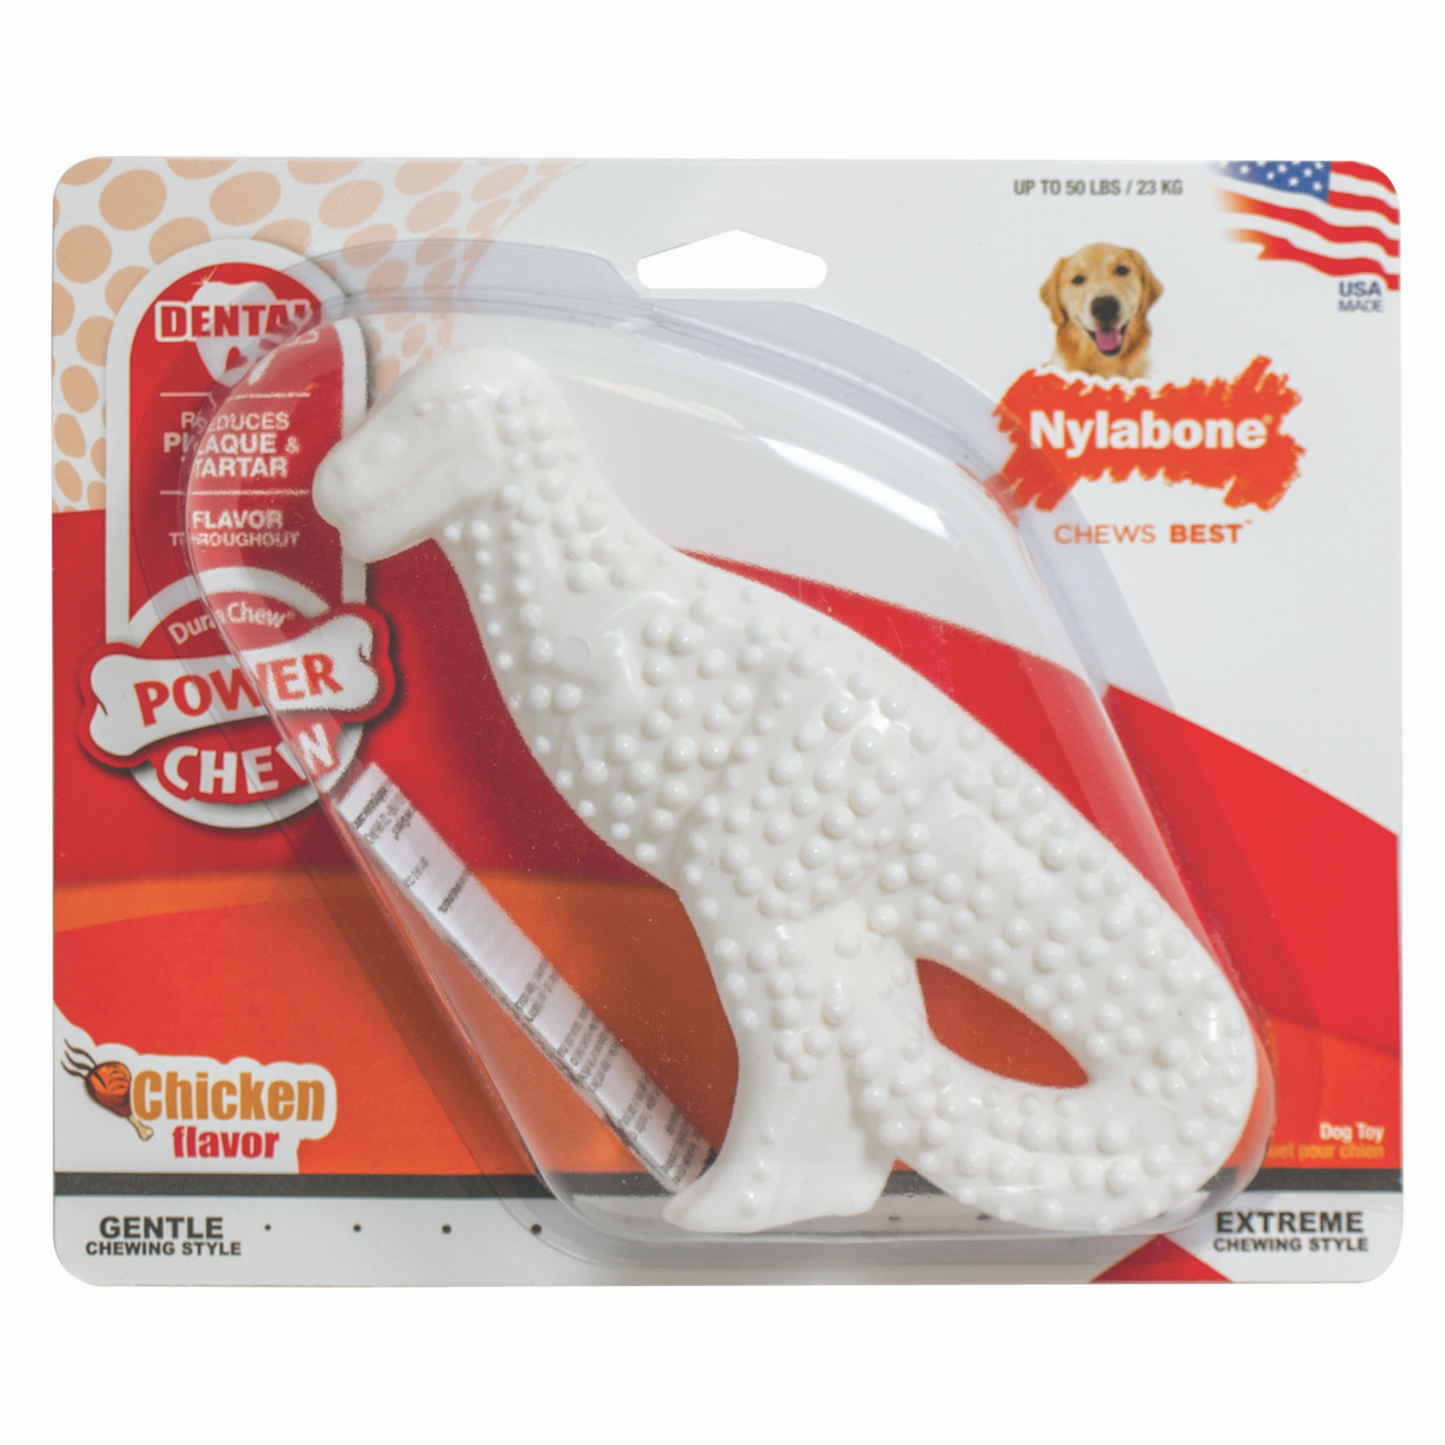 Nylabone Dental Dinosaur Chew Toy - Must have for teething puppies!